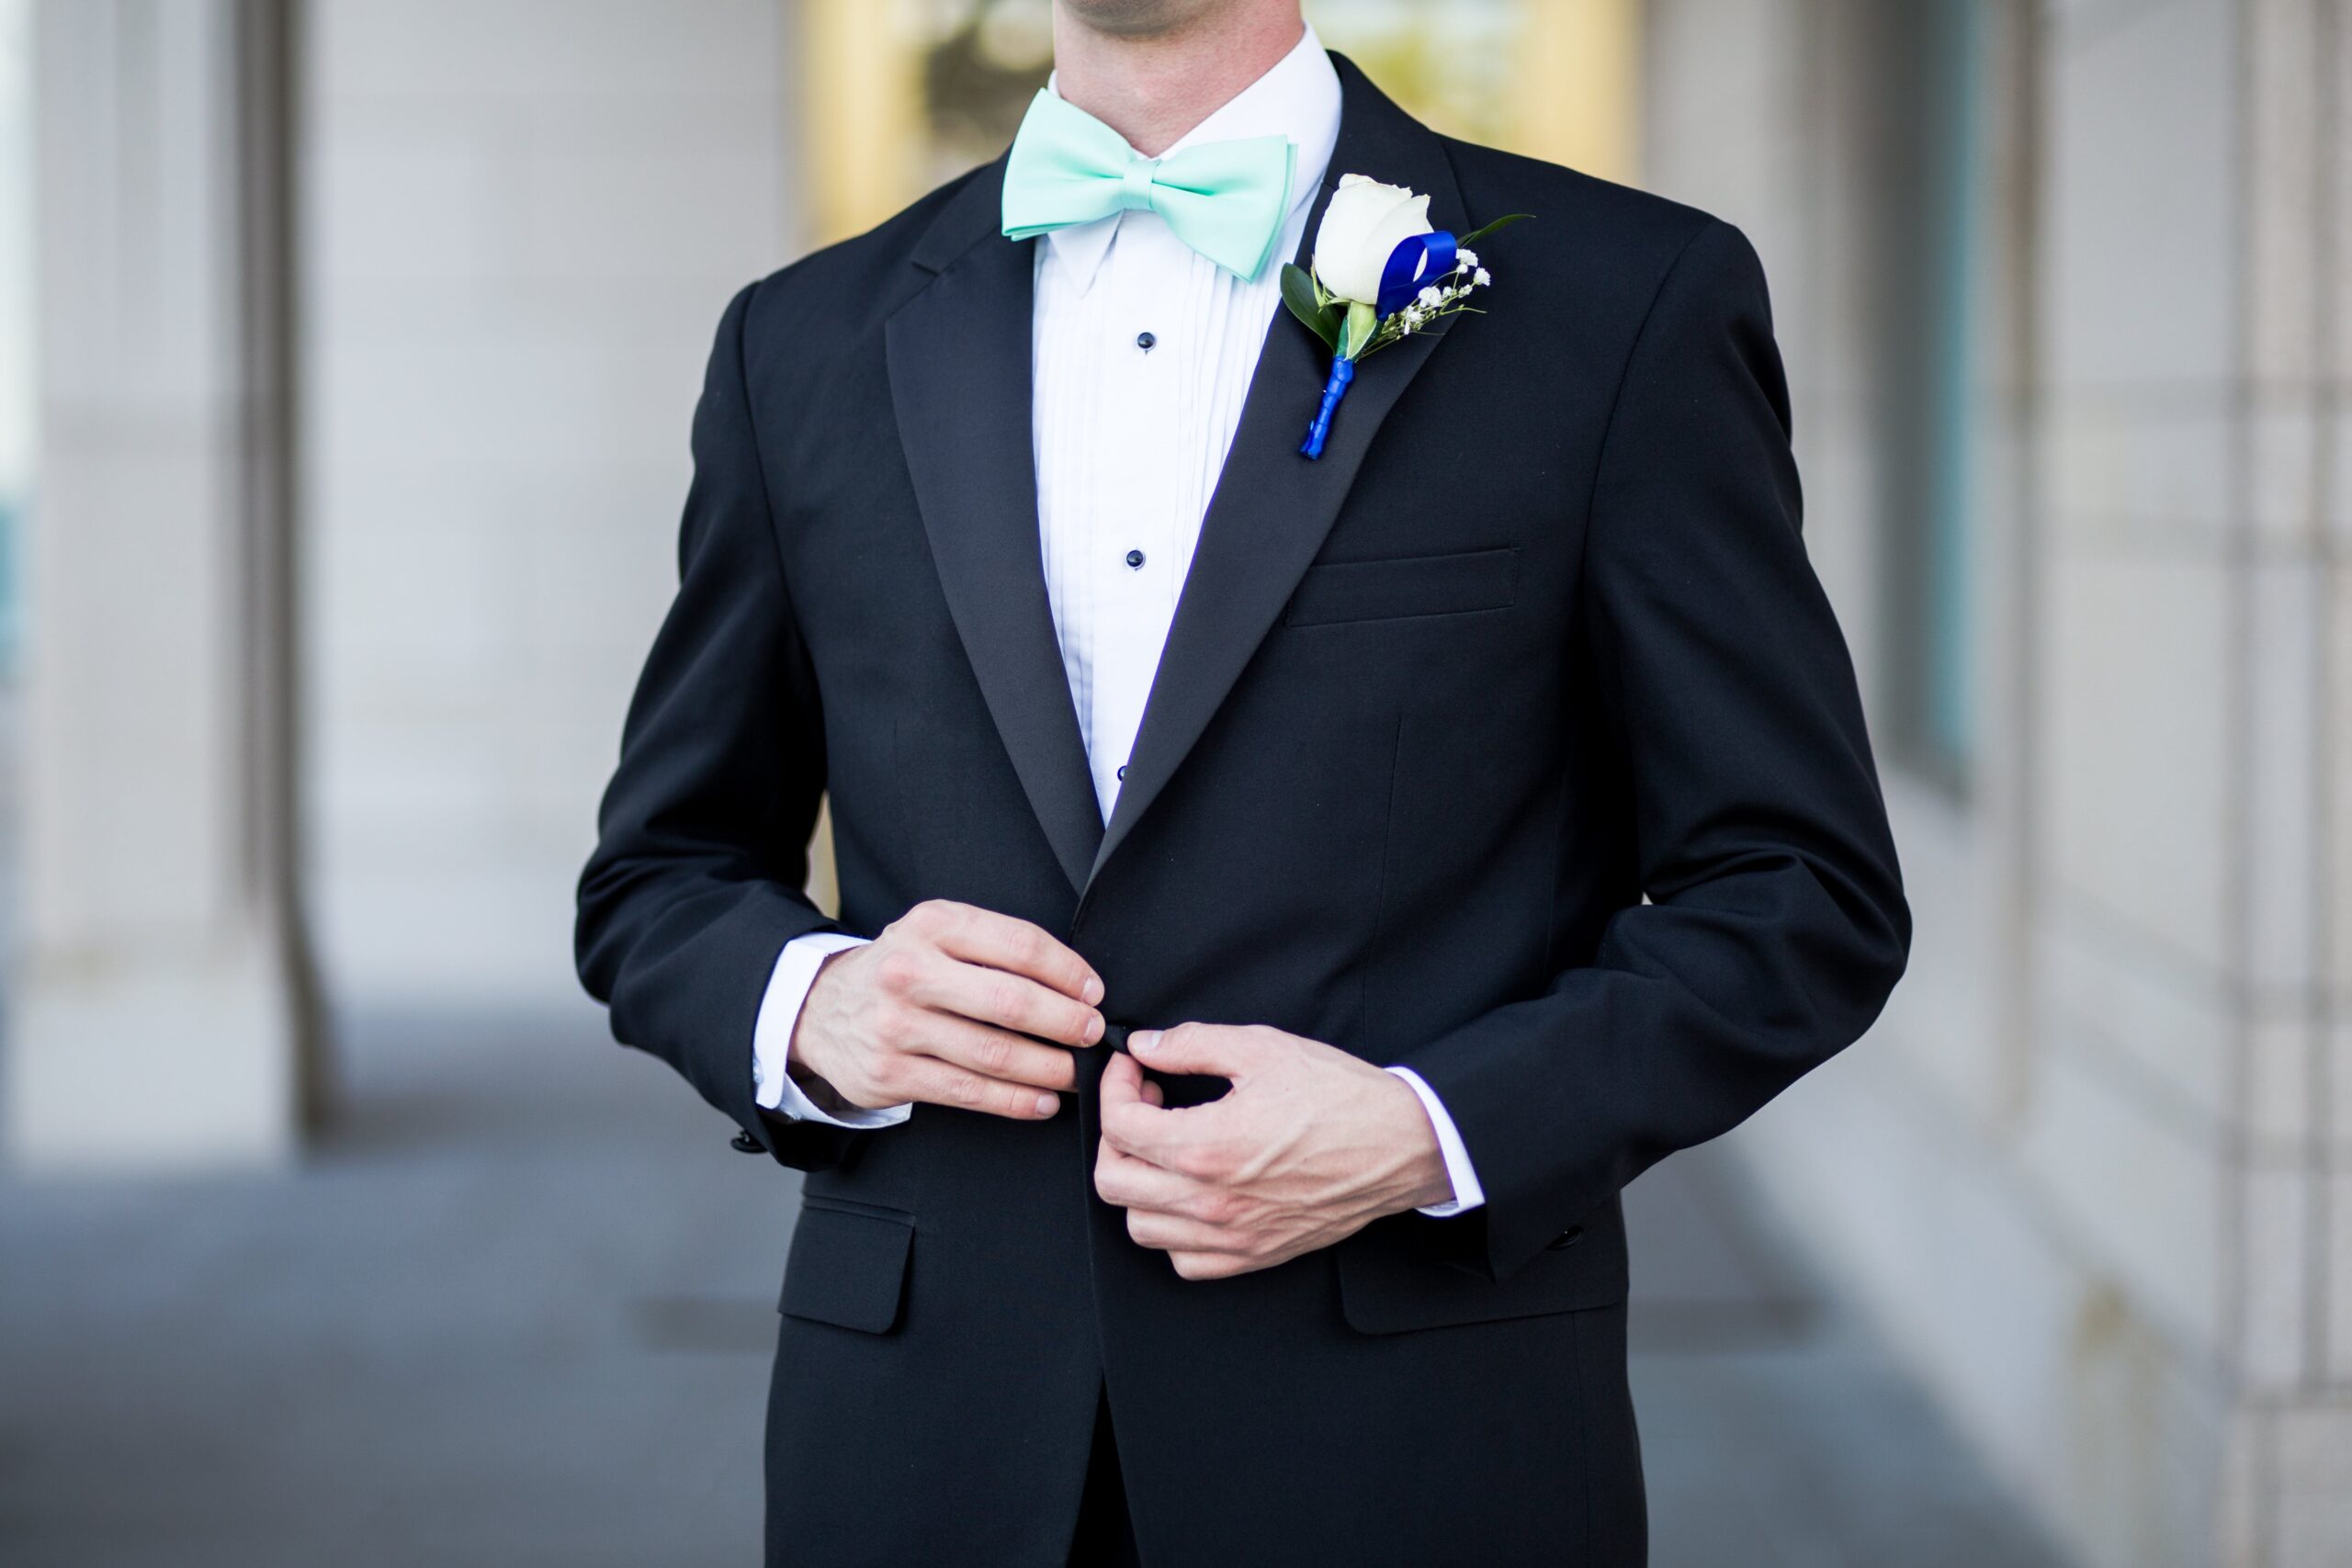 Insider Tips for Finding Affordable Tuxedo Rentals